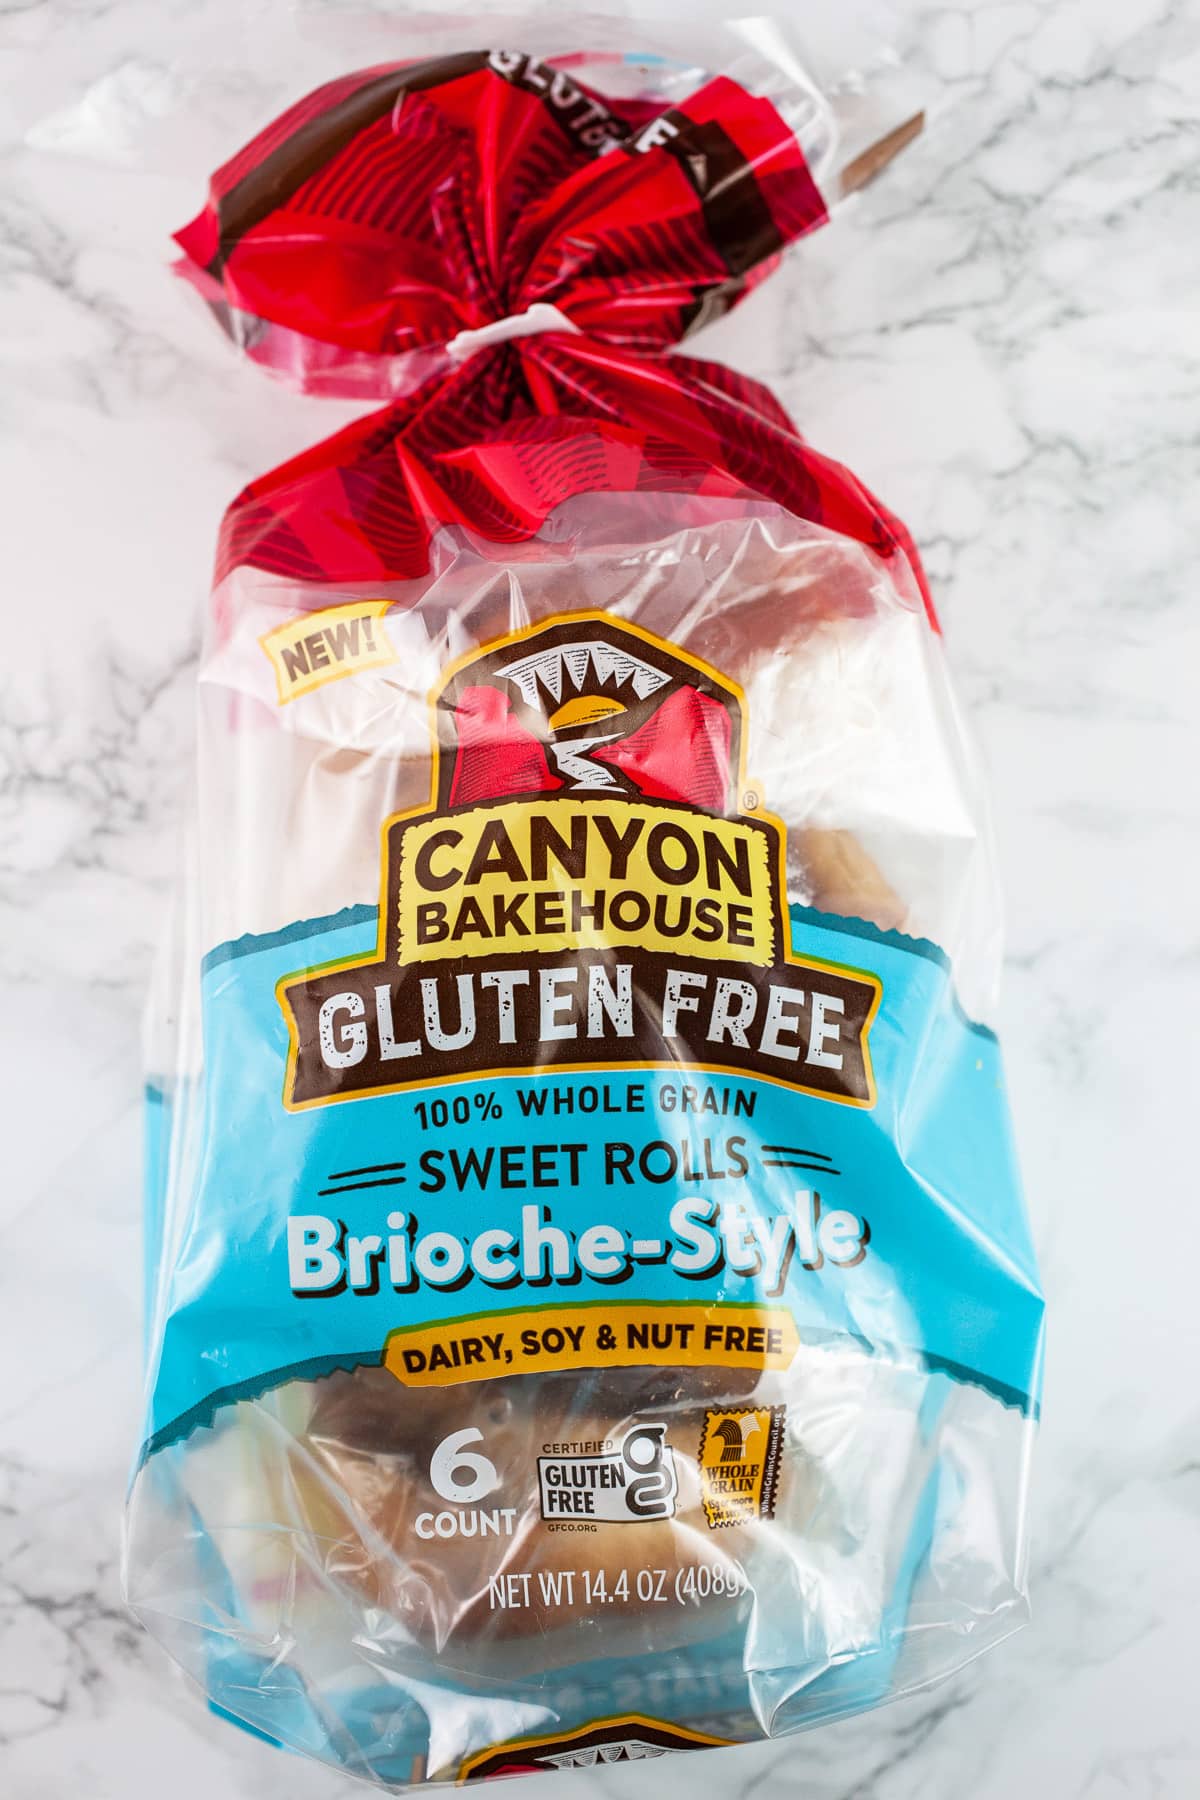 Package of Canyon Bakehouse gluten free brioche buns.